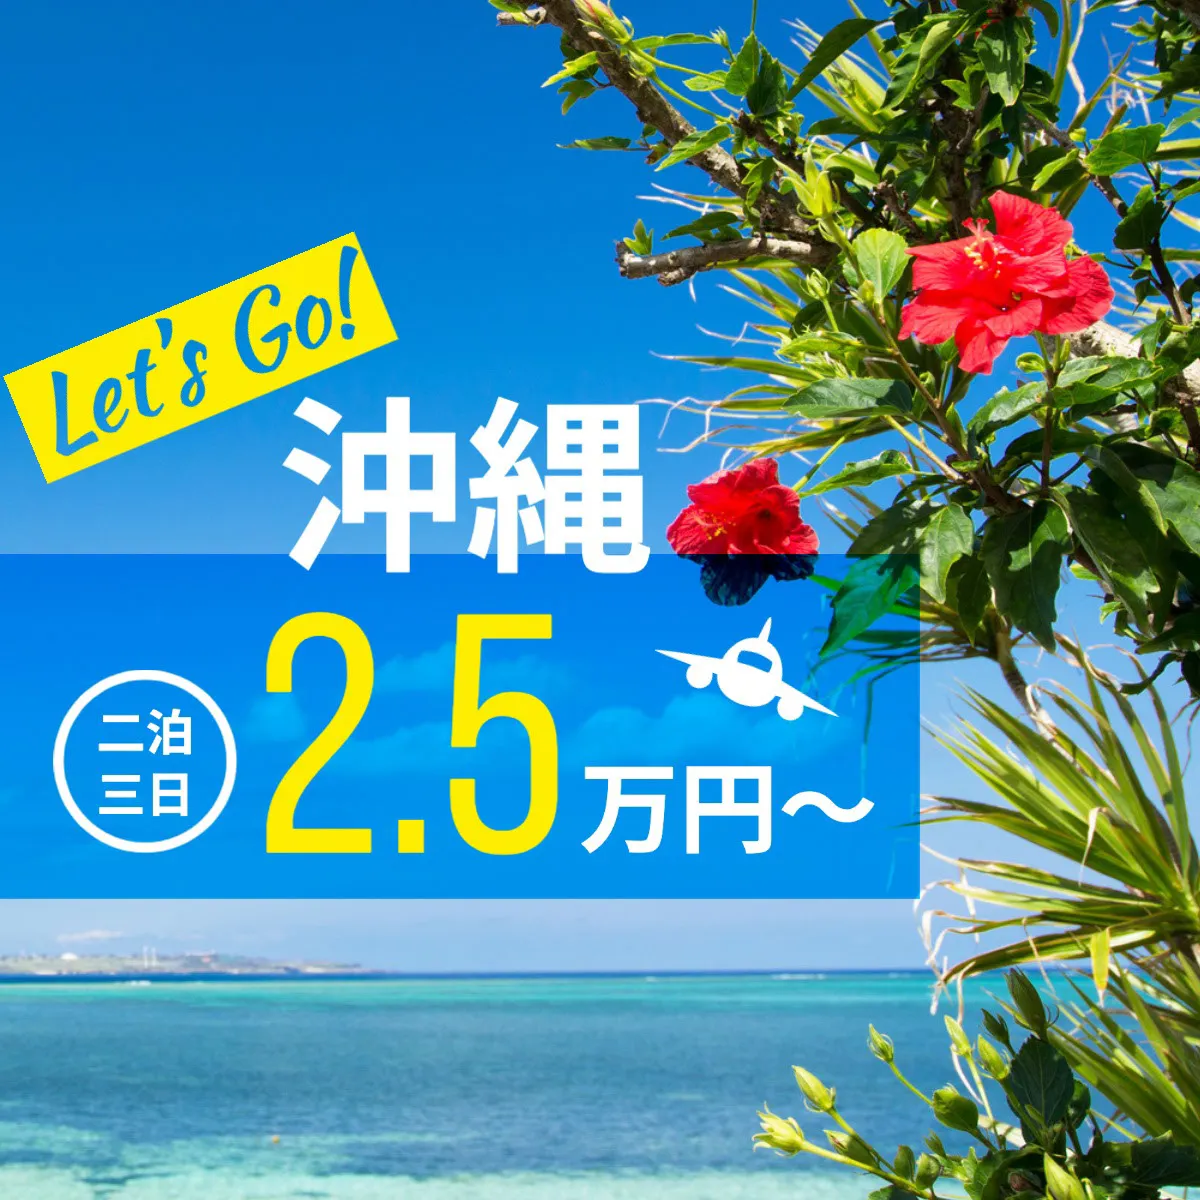 Facebook ads about traveling to Okinawa